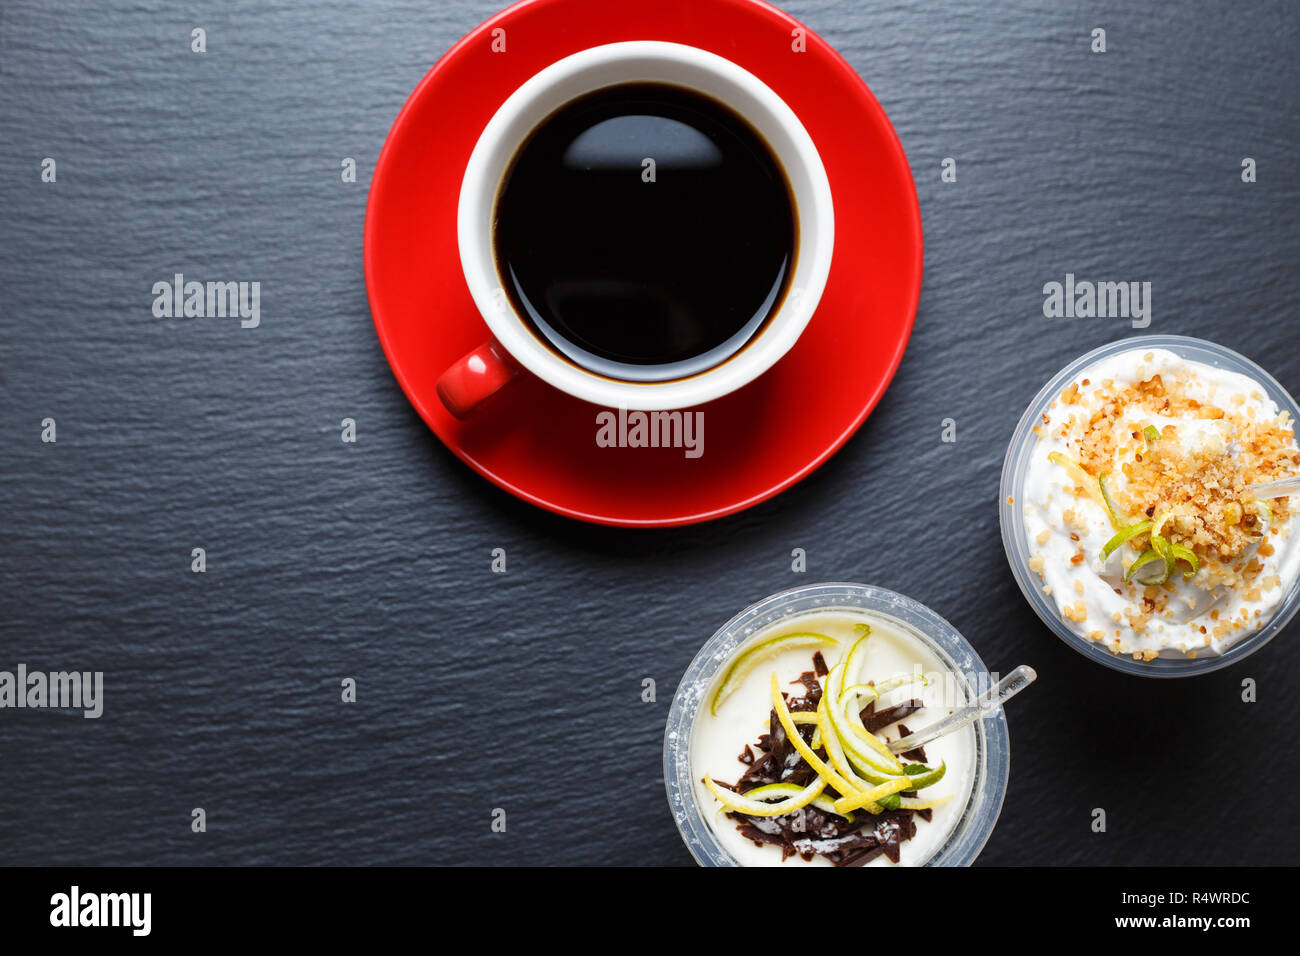 Red cup of coffee with take away desserts on black slate background Stock Photo